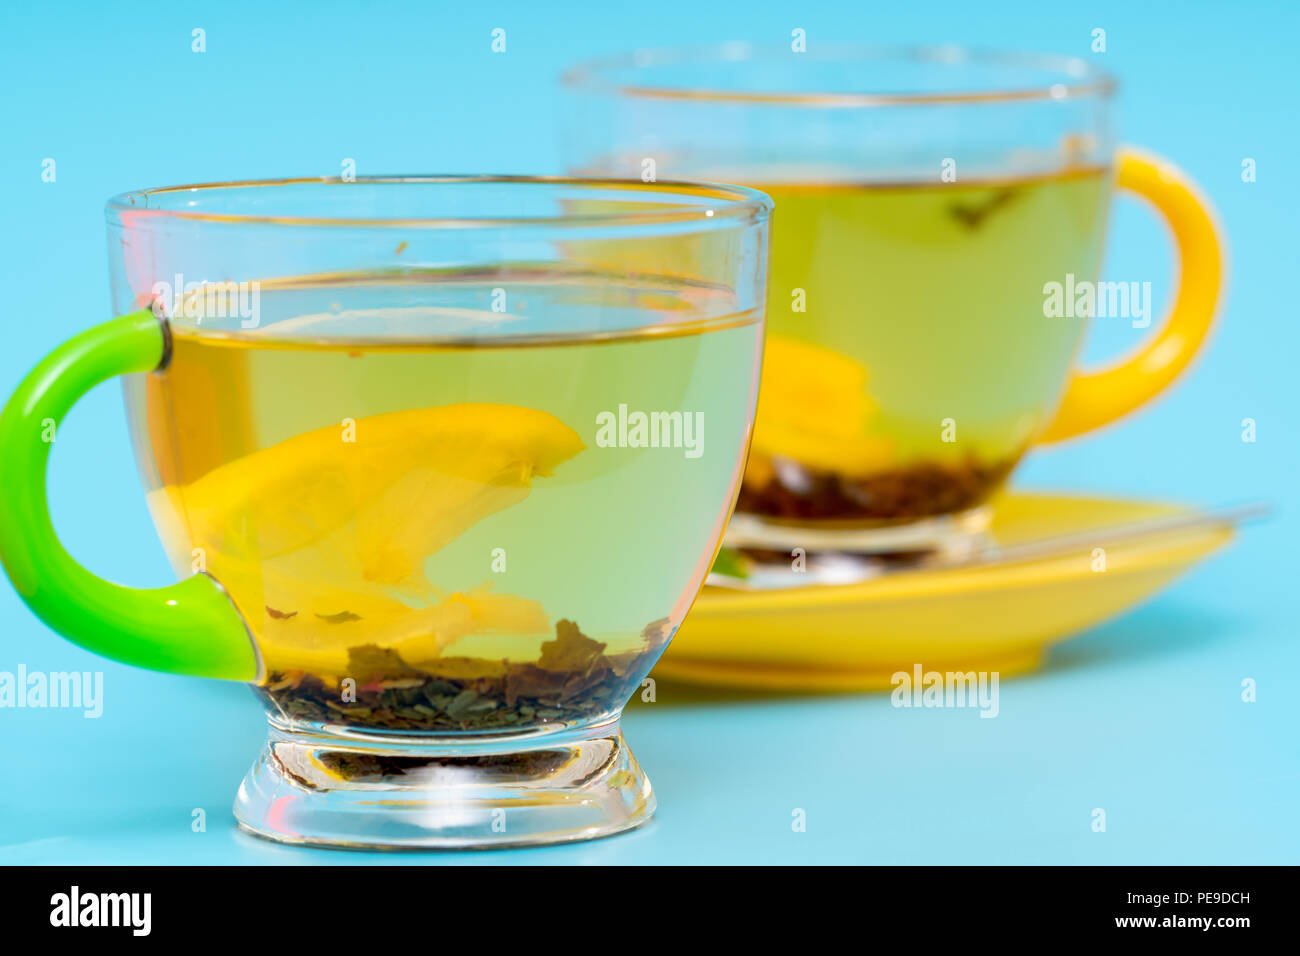 Close up on a glass cup of hot spicy tea with tea leaves over a blue background with a second cup behind Stock Photo